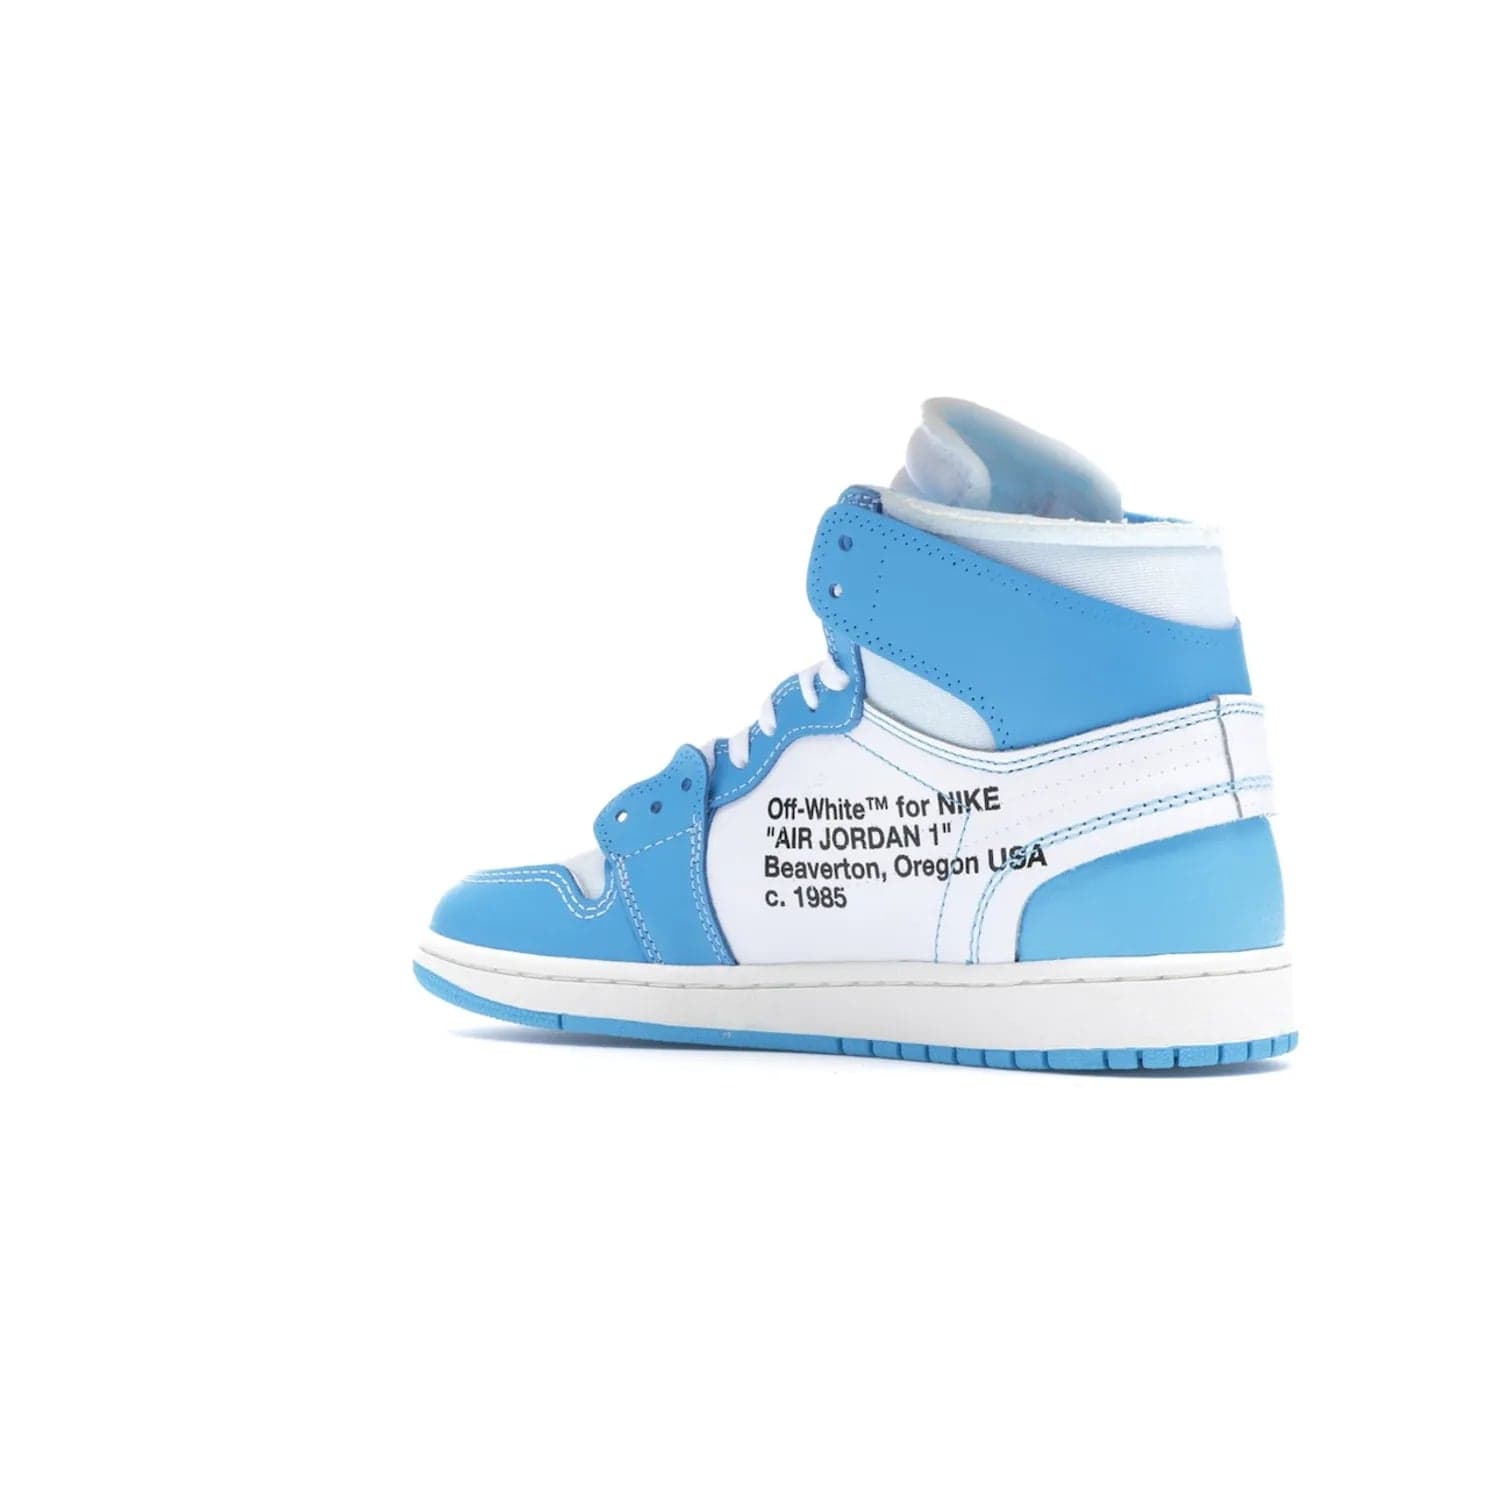 Jordan 1 Retro High Off-White University Blue - Image 23 - Only at www.BallersClubKickz.com - Classic Jordan 1 Retro High "Off-White UNC" sneakers meld style and comfort. Boasting deconstructed white and blue leather, Off-White detailing, and a white, dark powder blue and cone colorway, these sneakers are perfect for dressing up or down. Get the iconic Off-White Jordan 1's and upgrade your look.